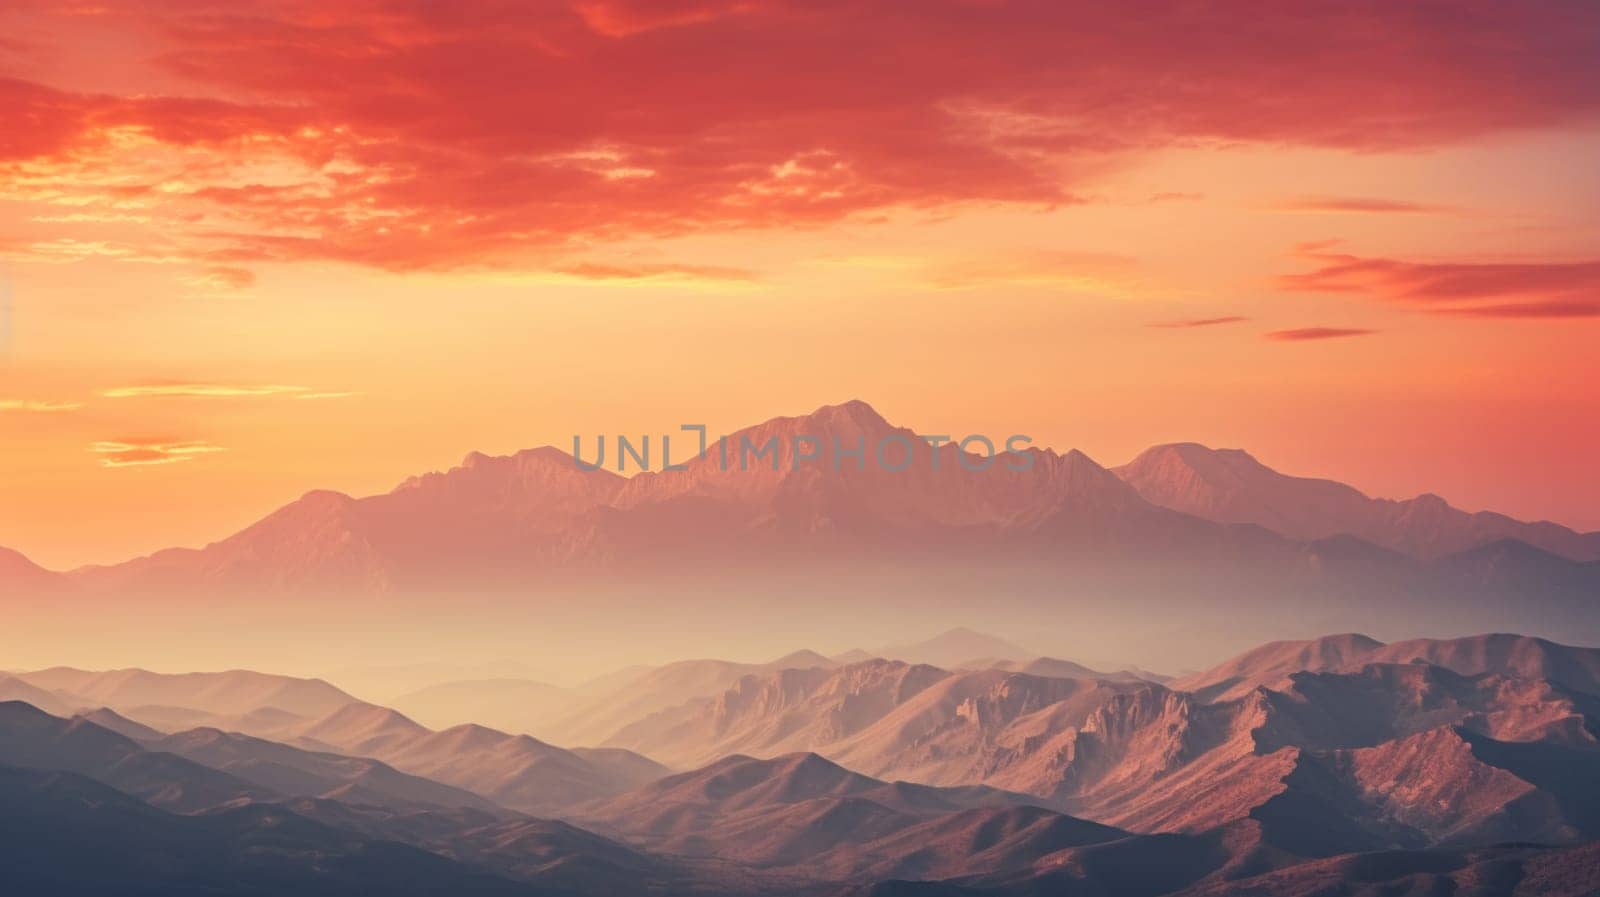 A view of a mountain range at sunset, AI by starush